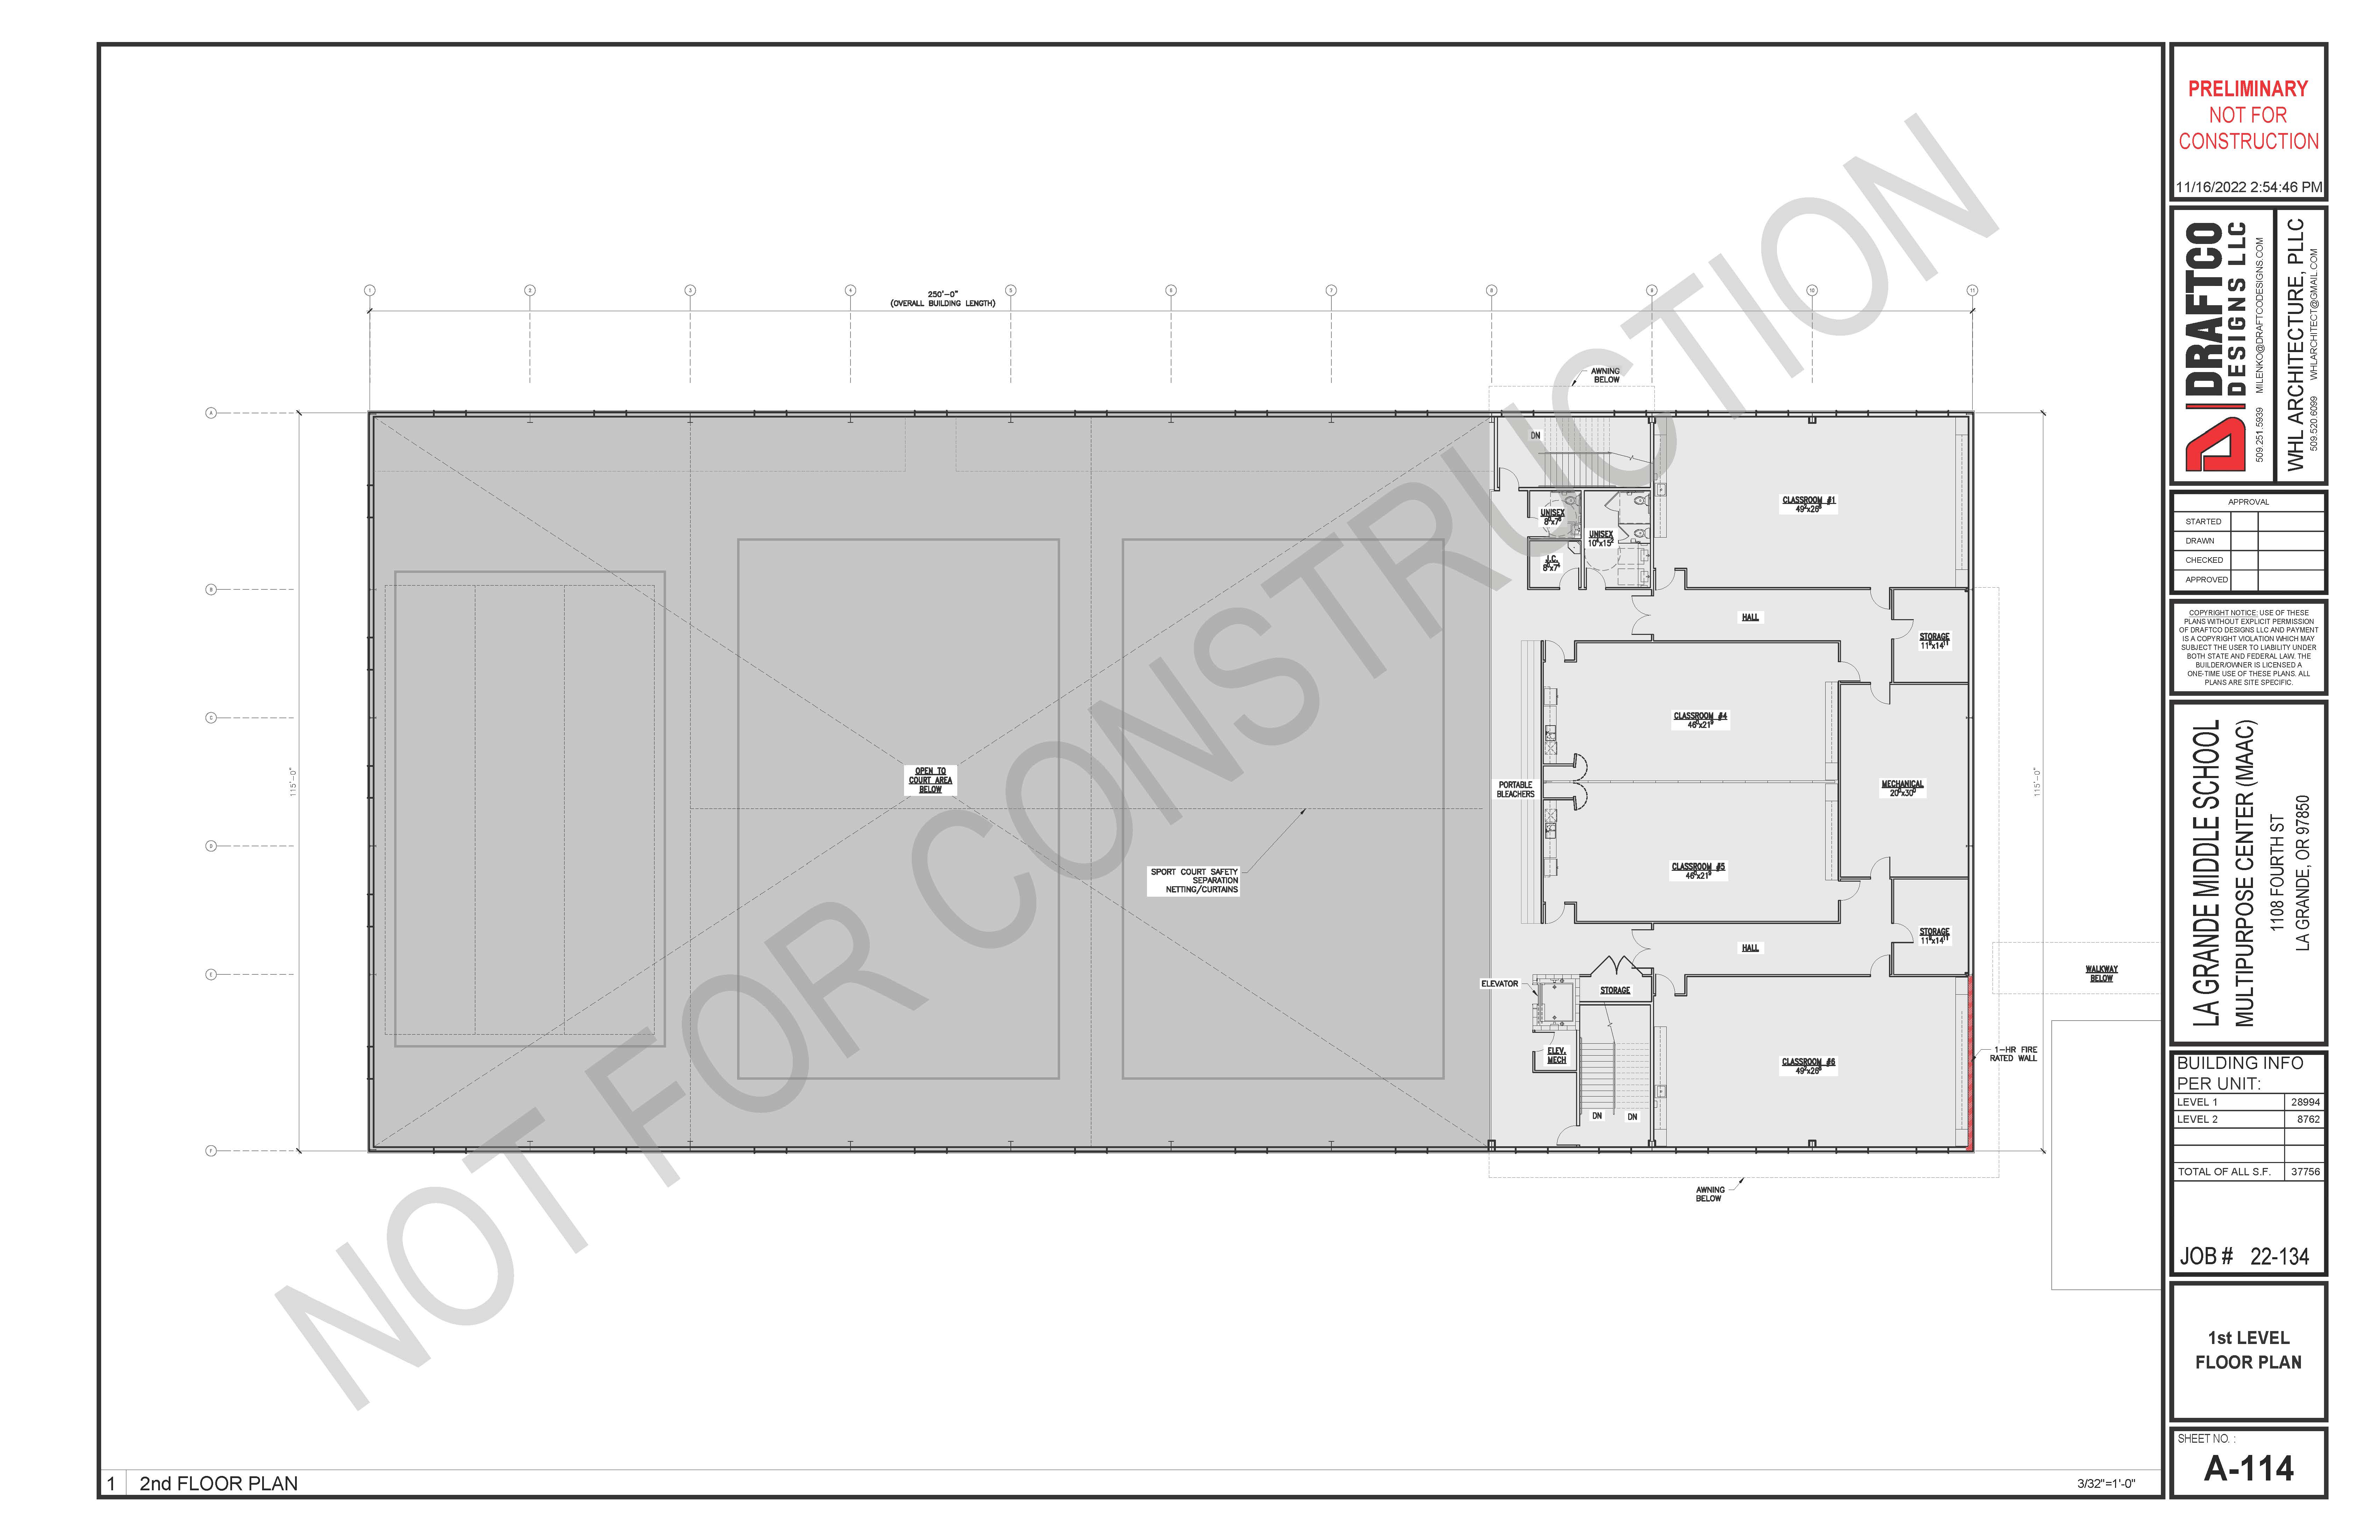 Floor plan of second floor in multi-use building-shows four classrooms and two restrooms